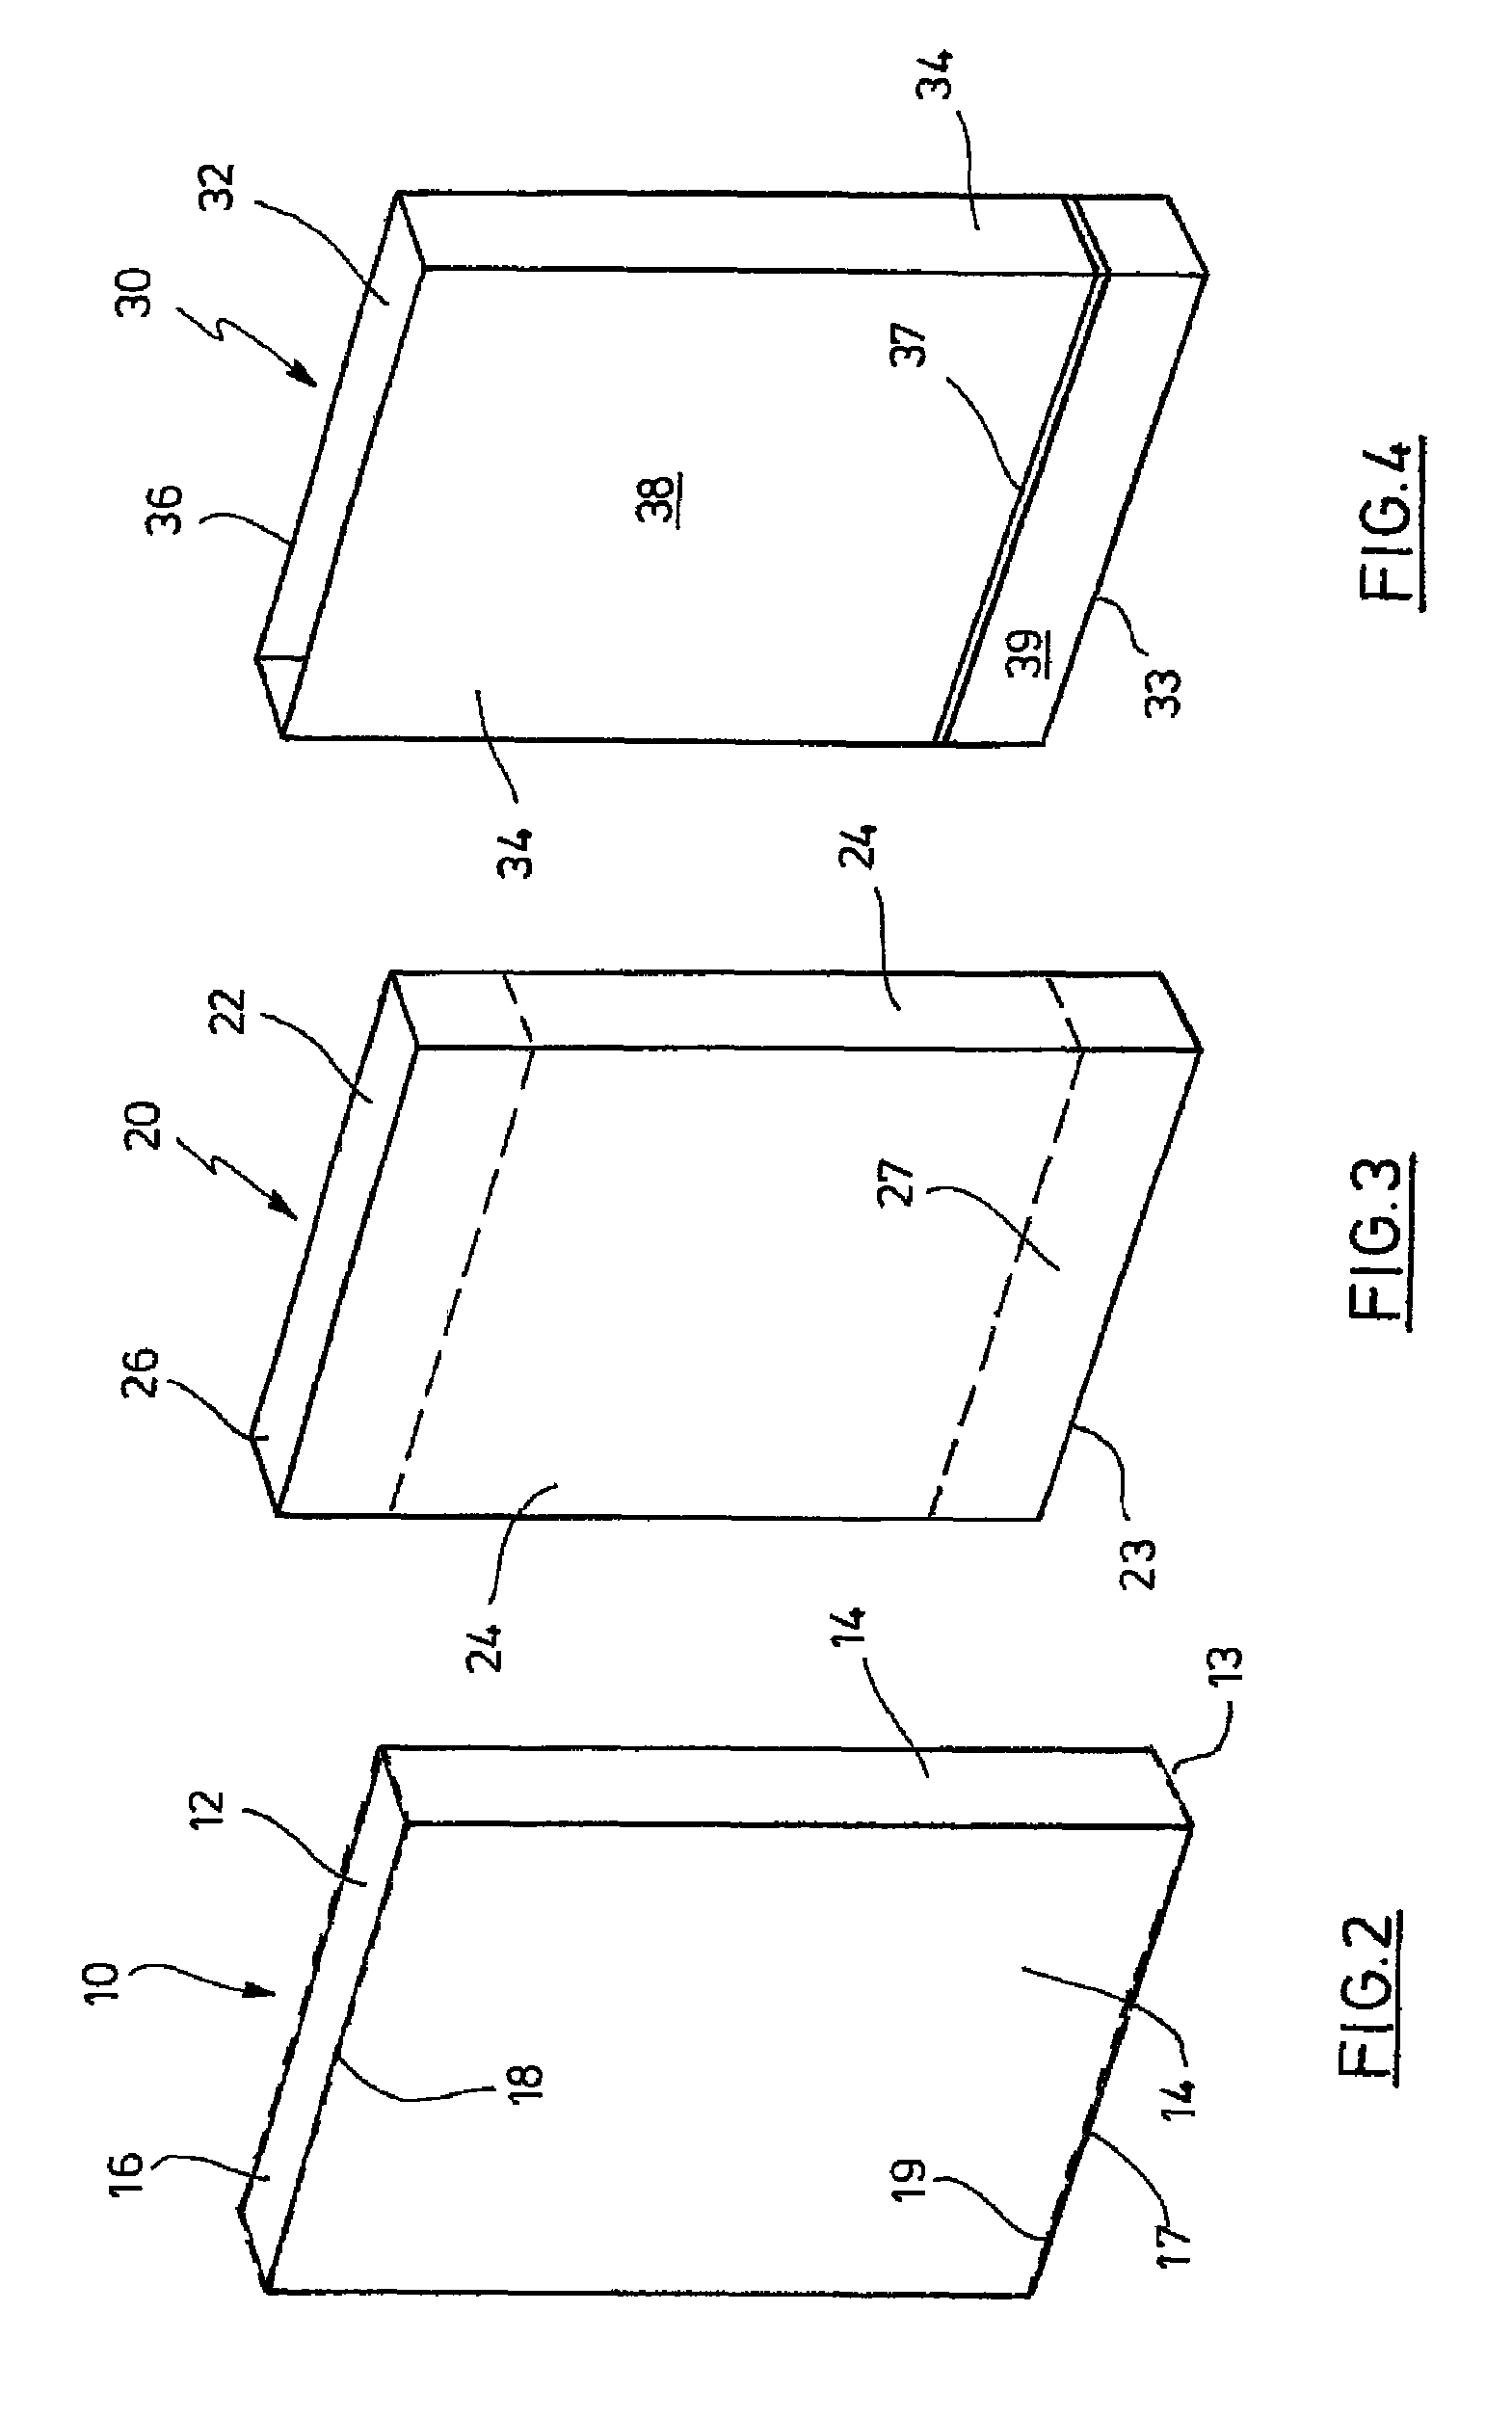 System for self-assembly of cigarettes